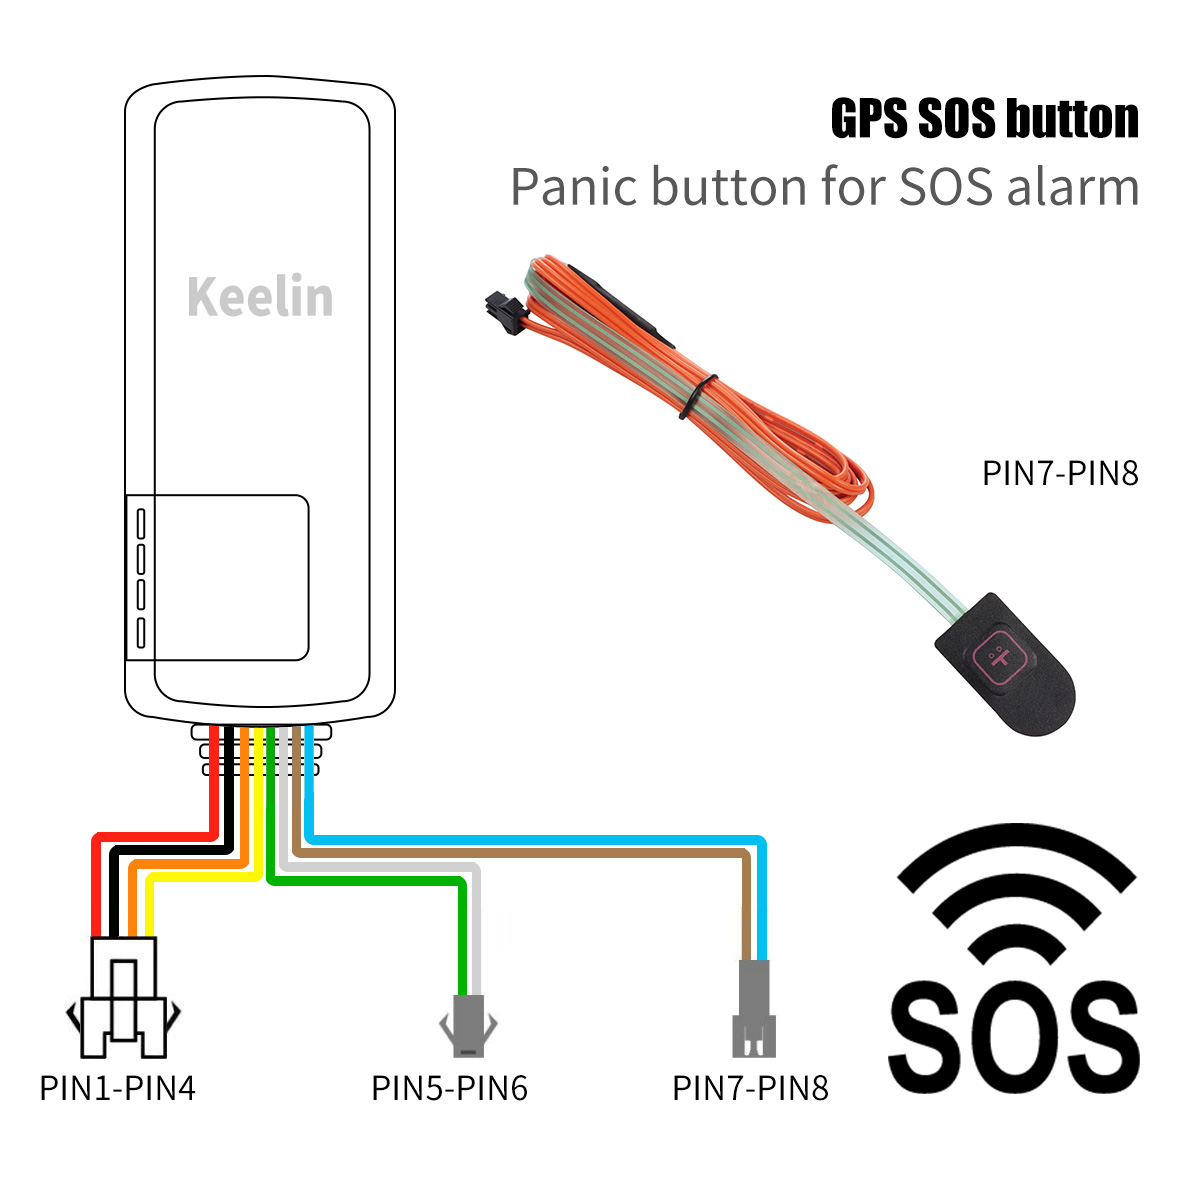 SOS Cable for SOS alerts